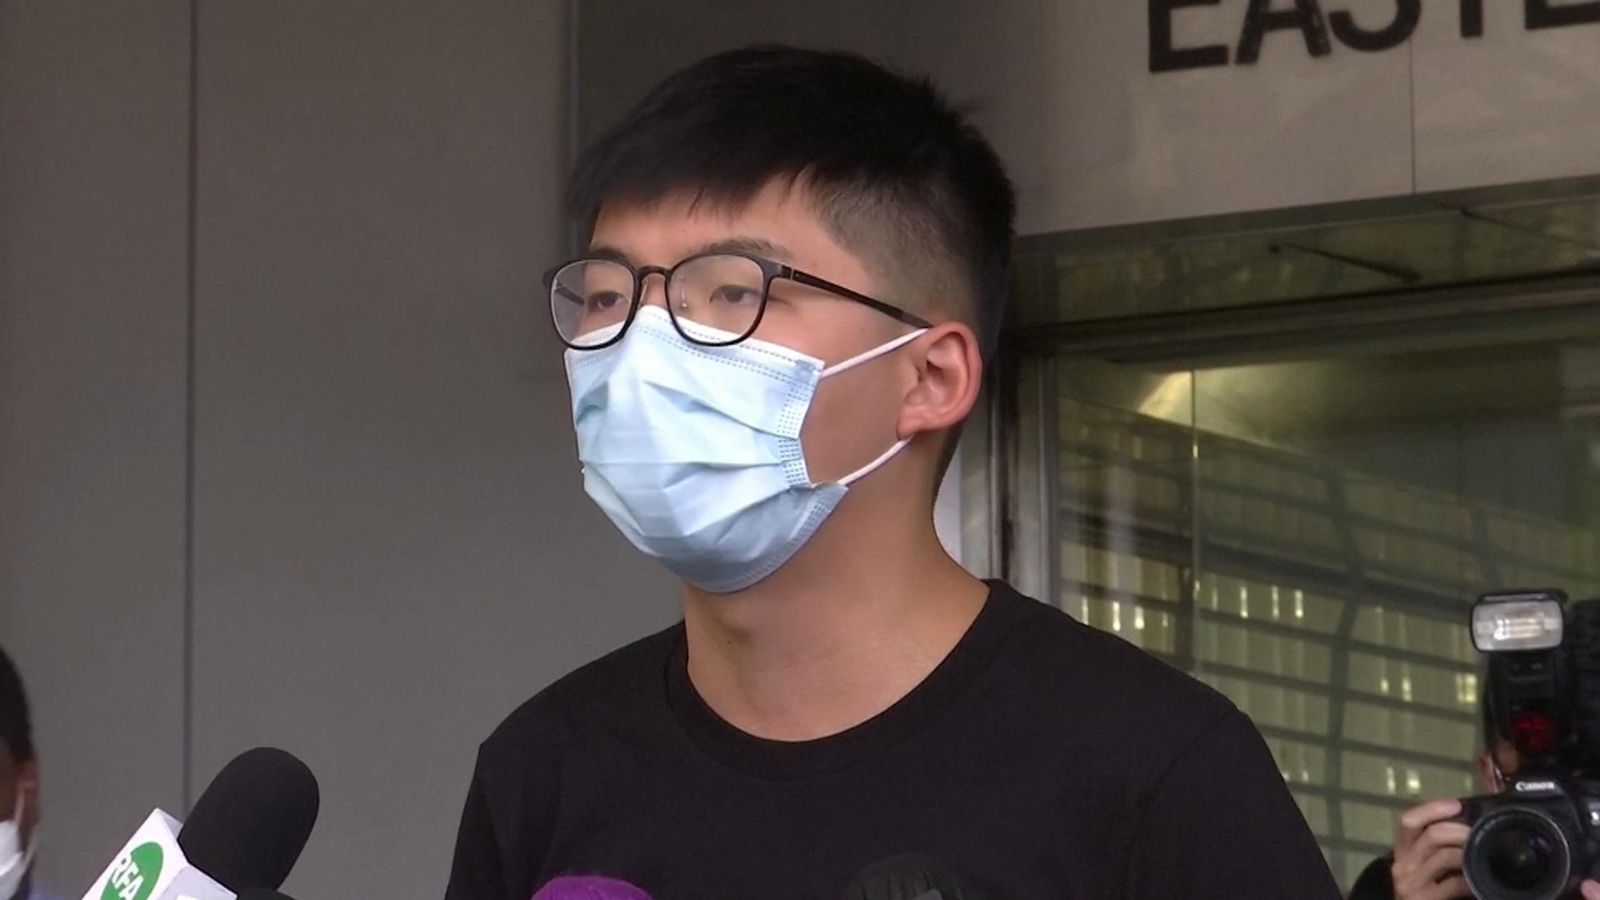 Hong Kong democracy activist Joshua Wong arrested in prison after 53 Democrats detained